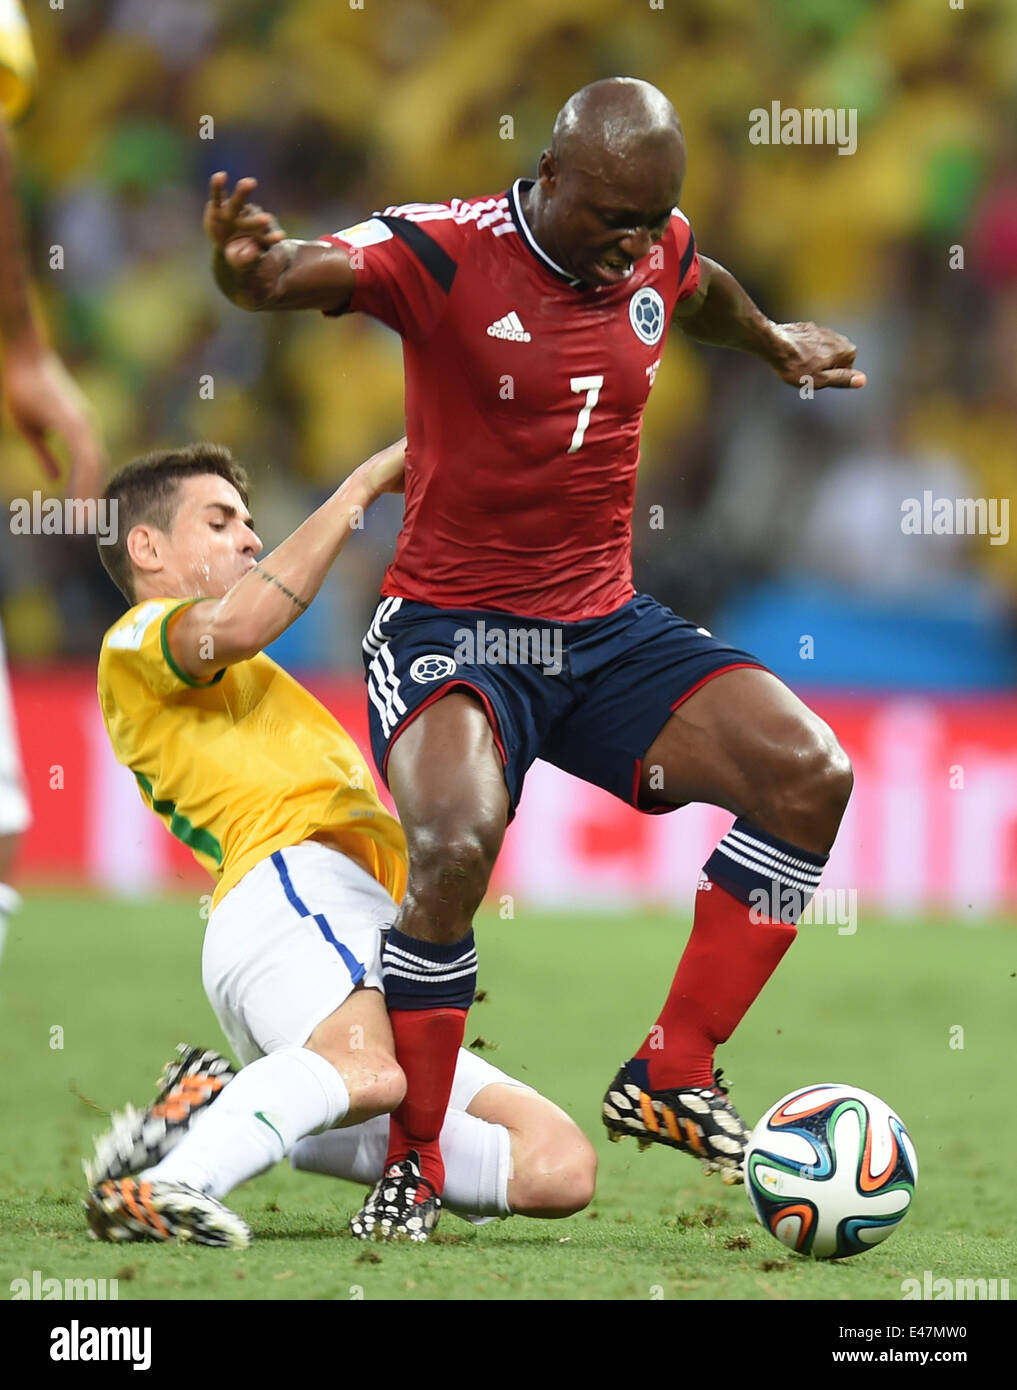 Fortaleza, Brazil. 4th July, 2014. Colombia's Pablo Armero (front) competes during a quarter-finals match between Brazil and Colombia of 2014 FIFA World Cup at the Estadio Castelao Stadium in Fortaleza, Brazil, on July 4, 2014. Credit:  Li Ga/Xinhua/Alamy Live News Stock Photo